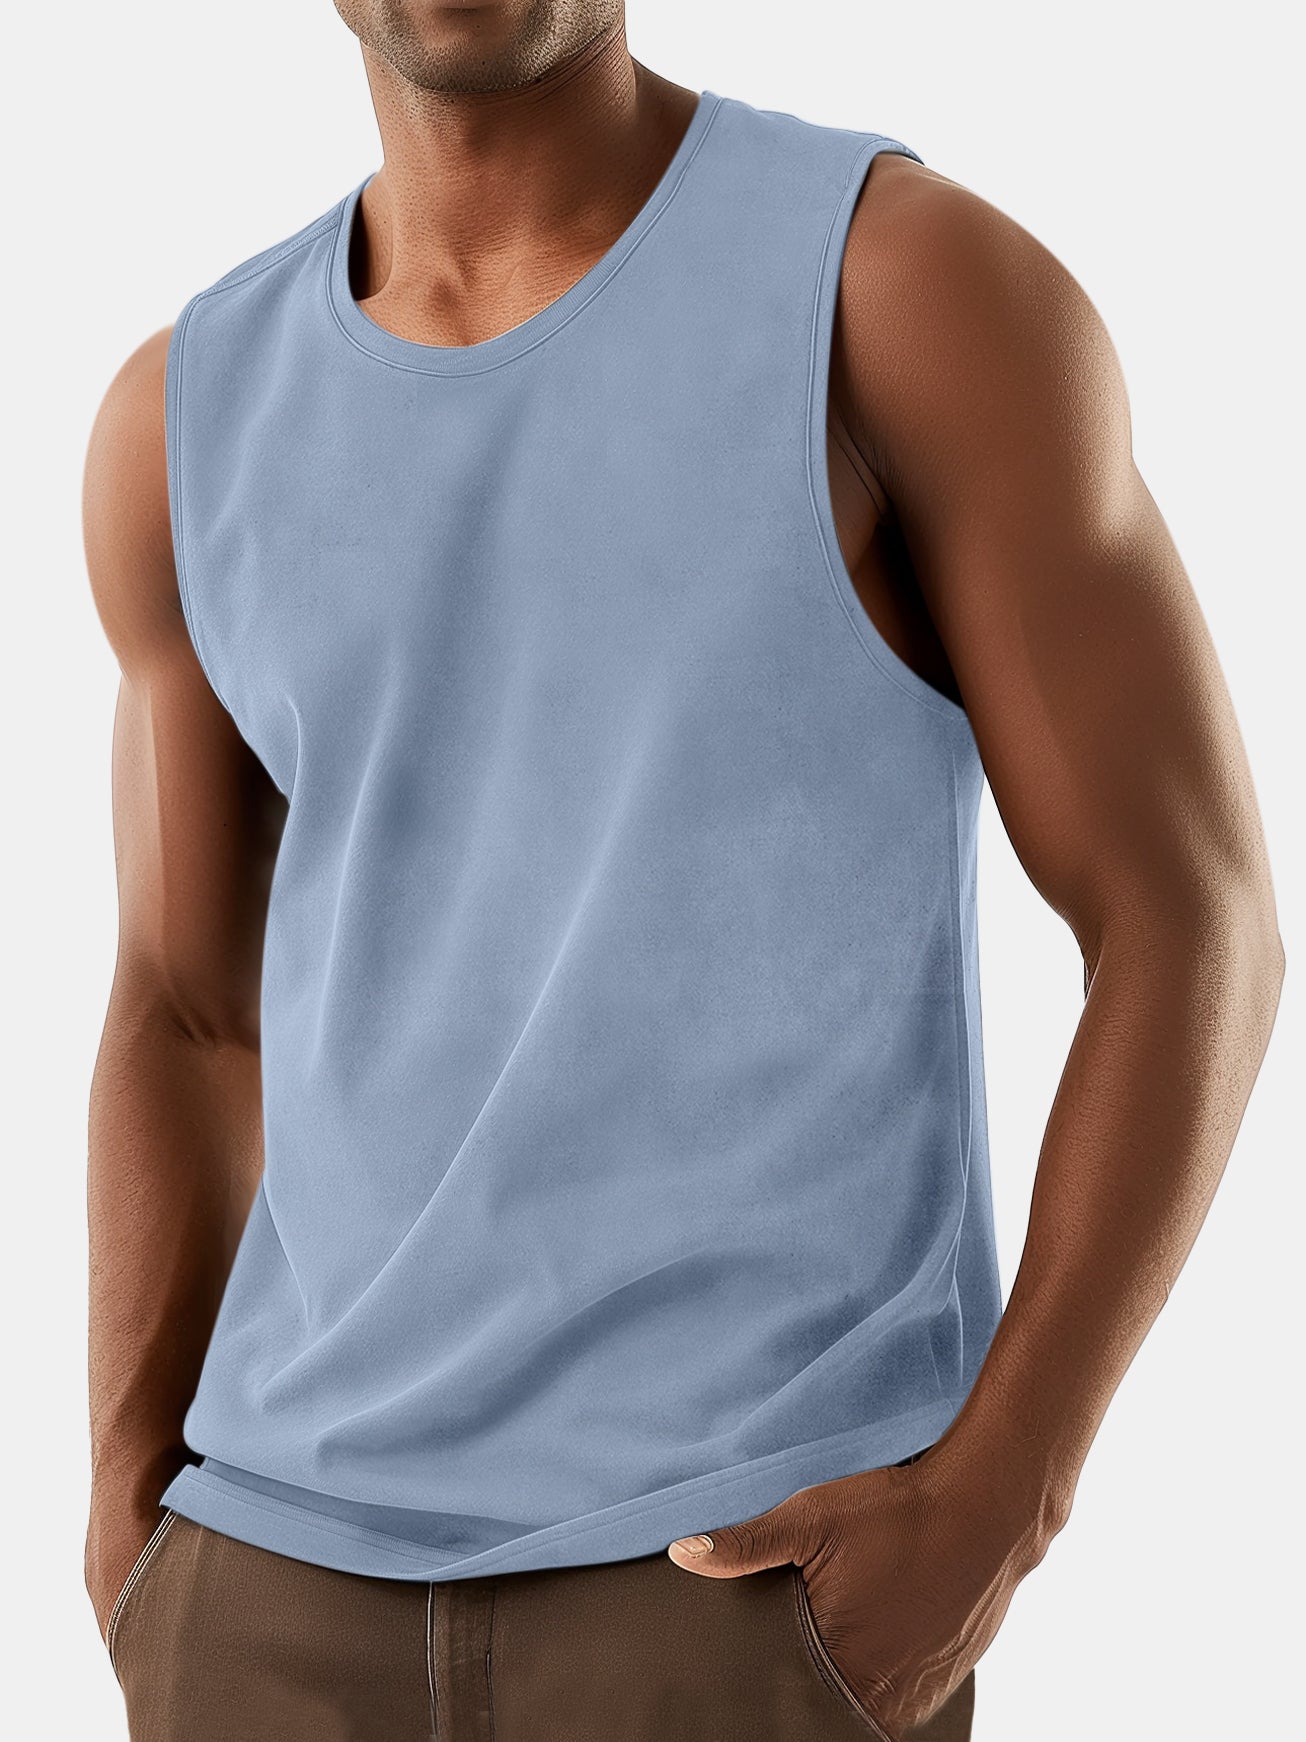 Men's Solid Color Comfort Everyday Suede Sleeveless T-shirt